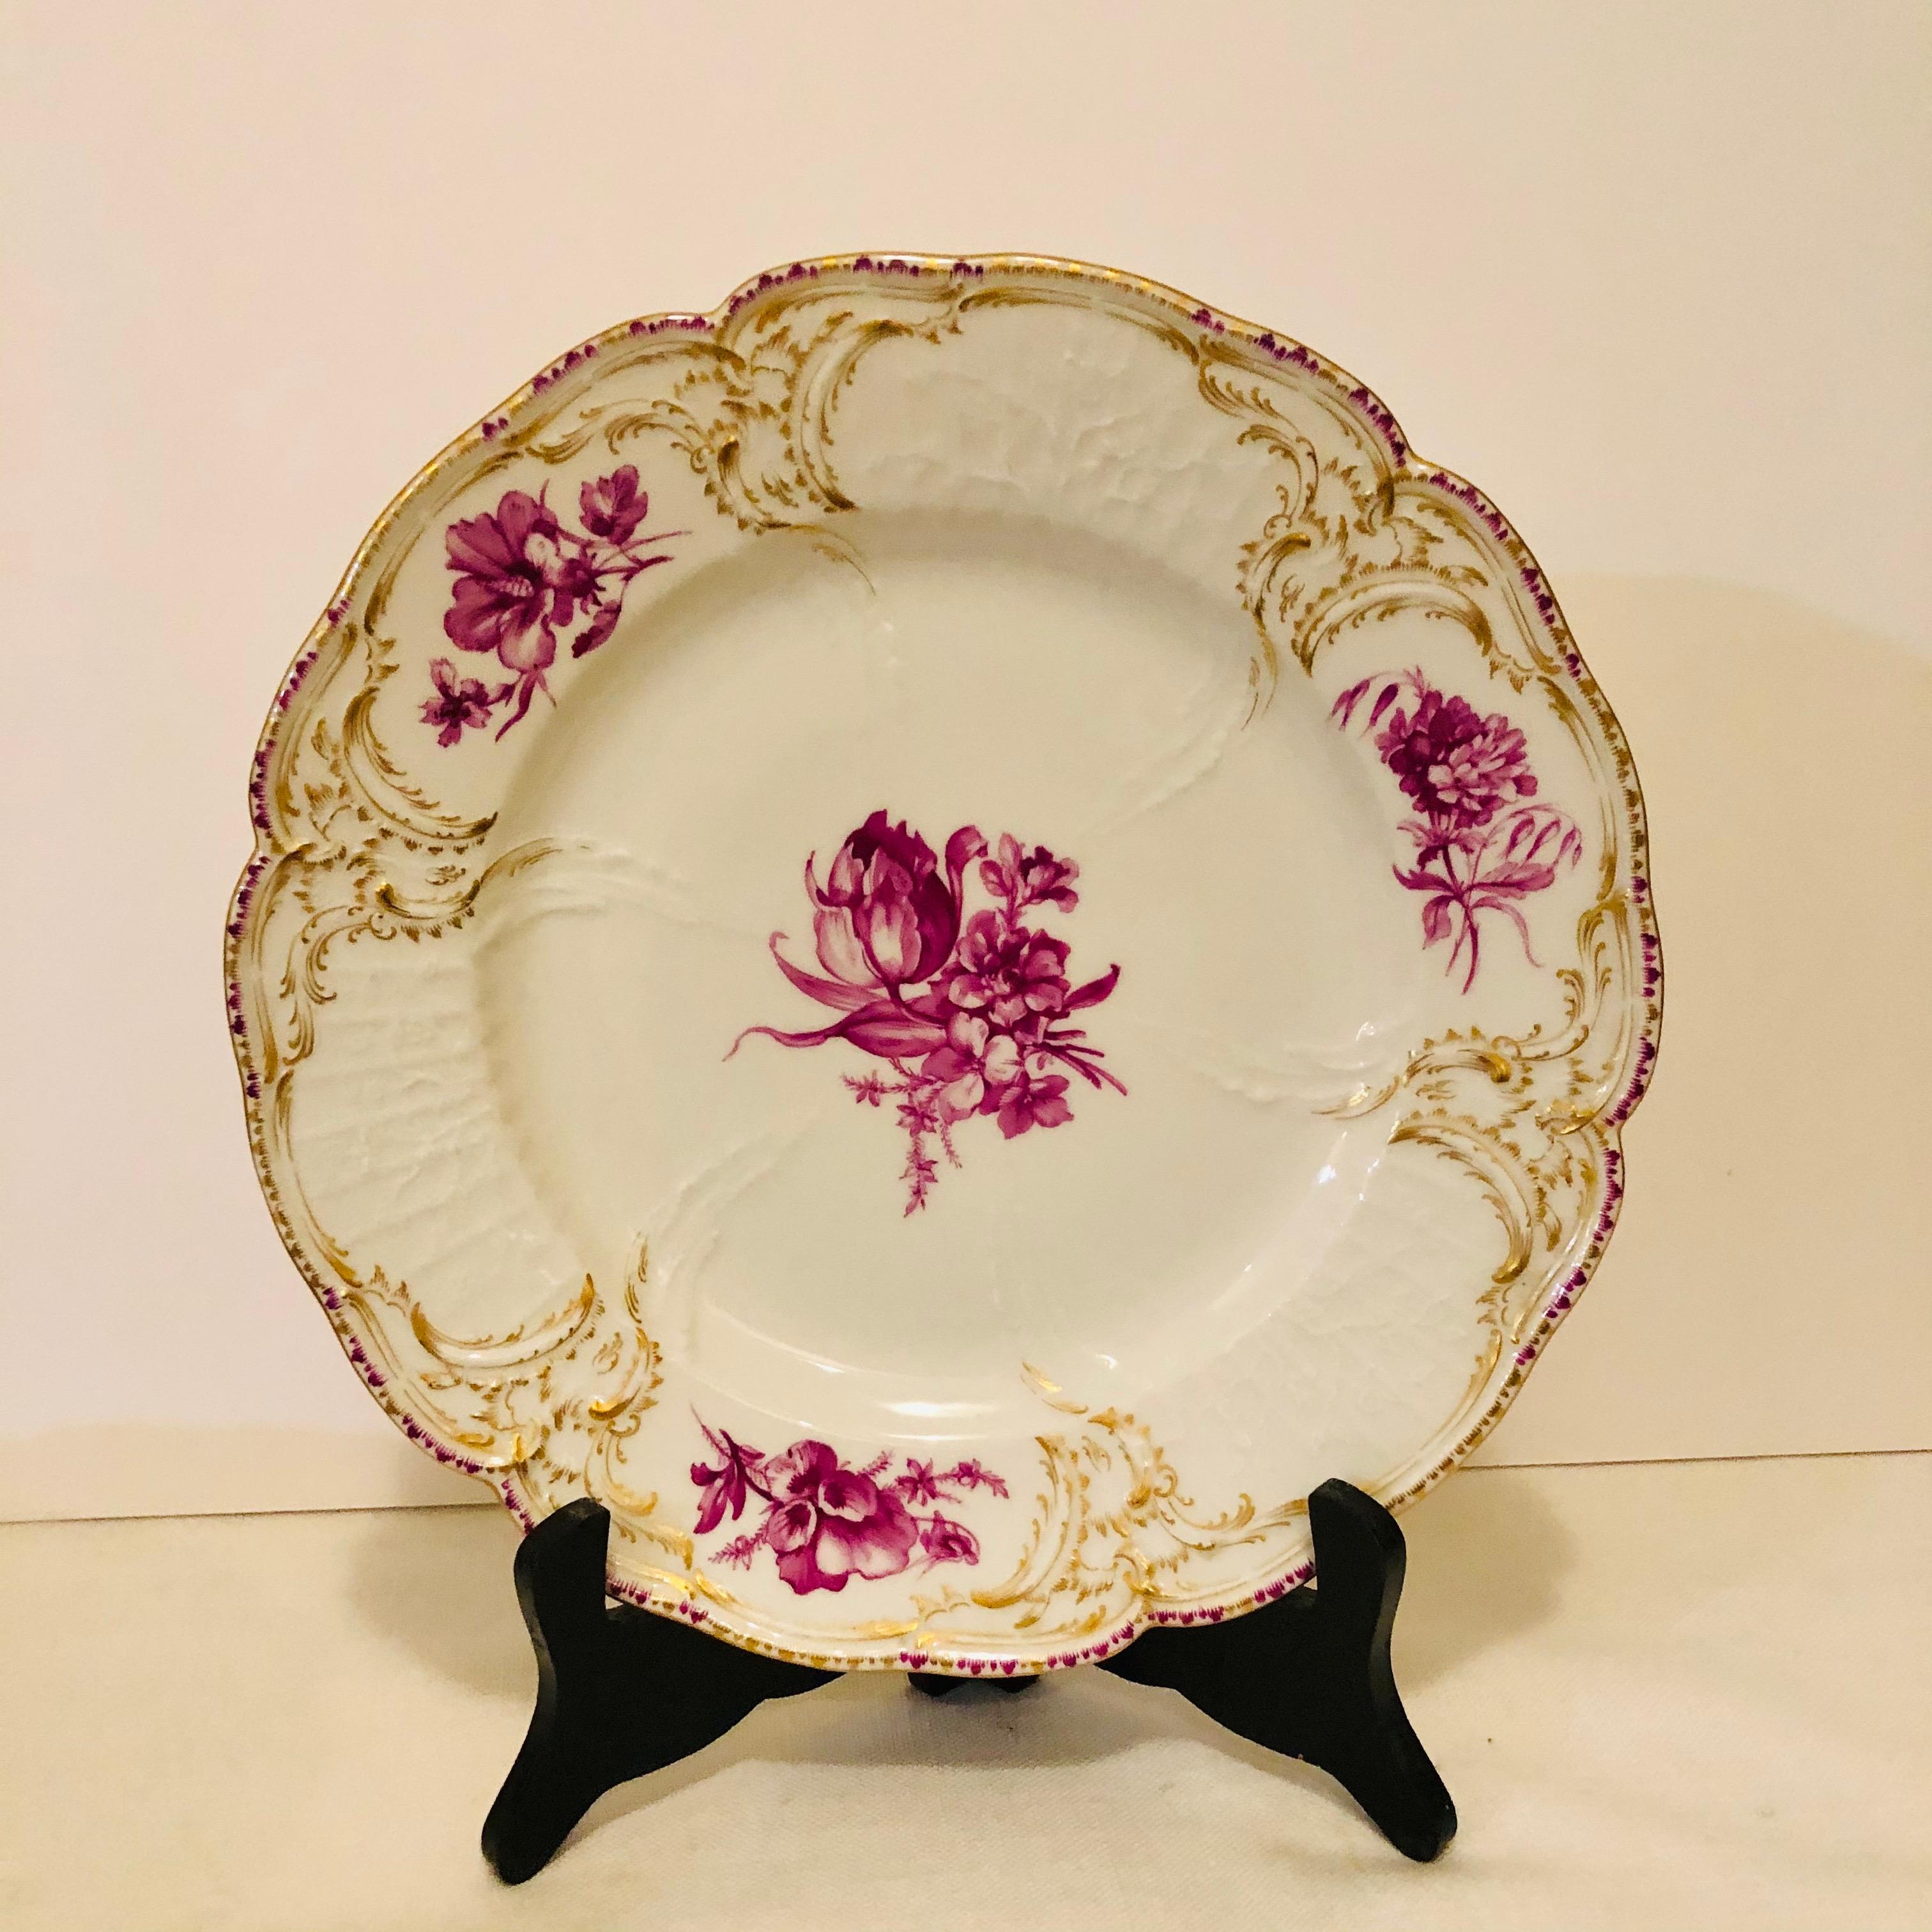 Twelve KPM Dinner Plates Each Painted with a Different Puce Flower Bouquet For Sale 2